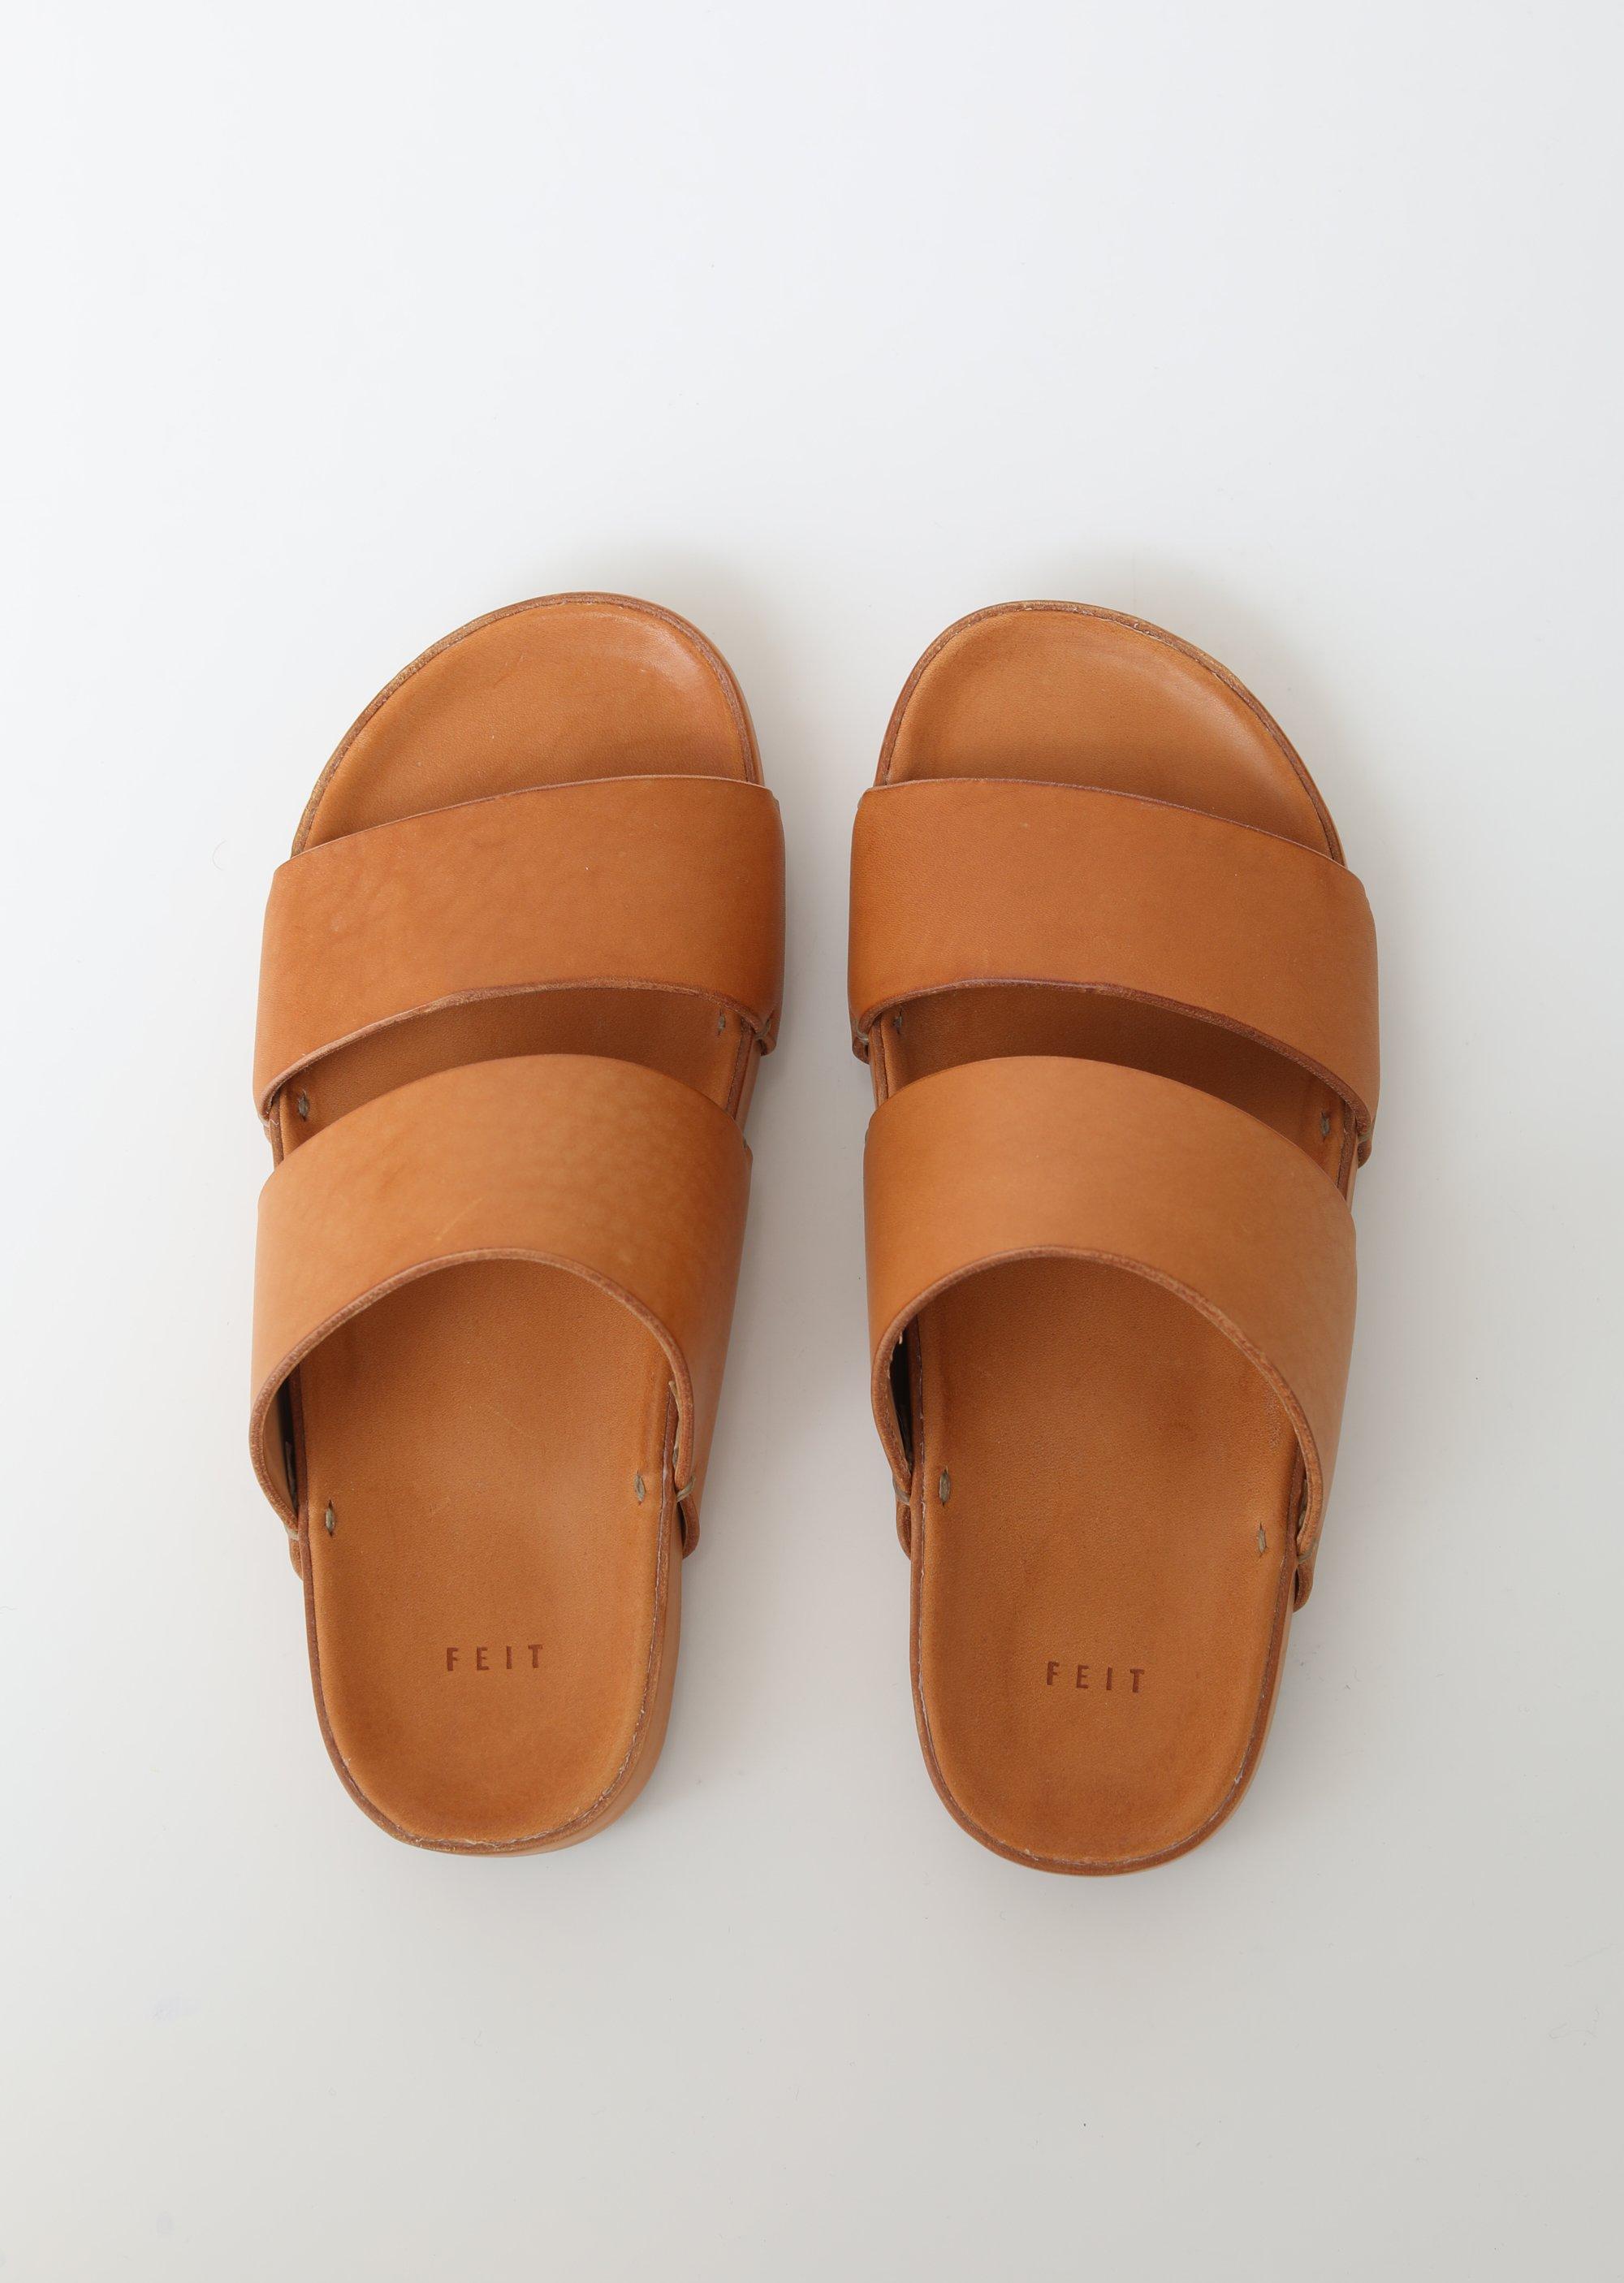 Feit Vegetable Tanned Leather Sandals in Natural - Lyst